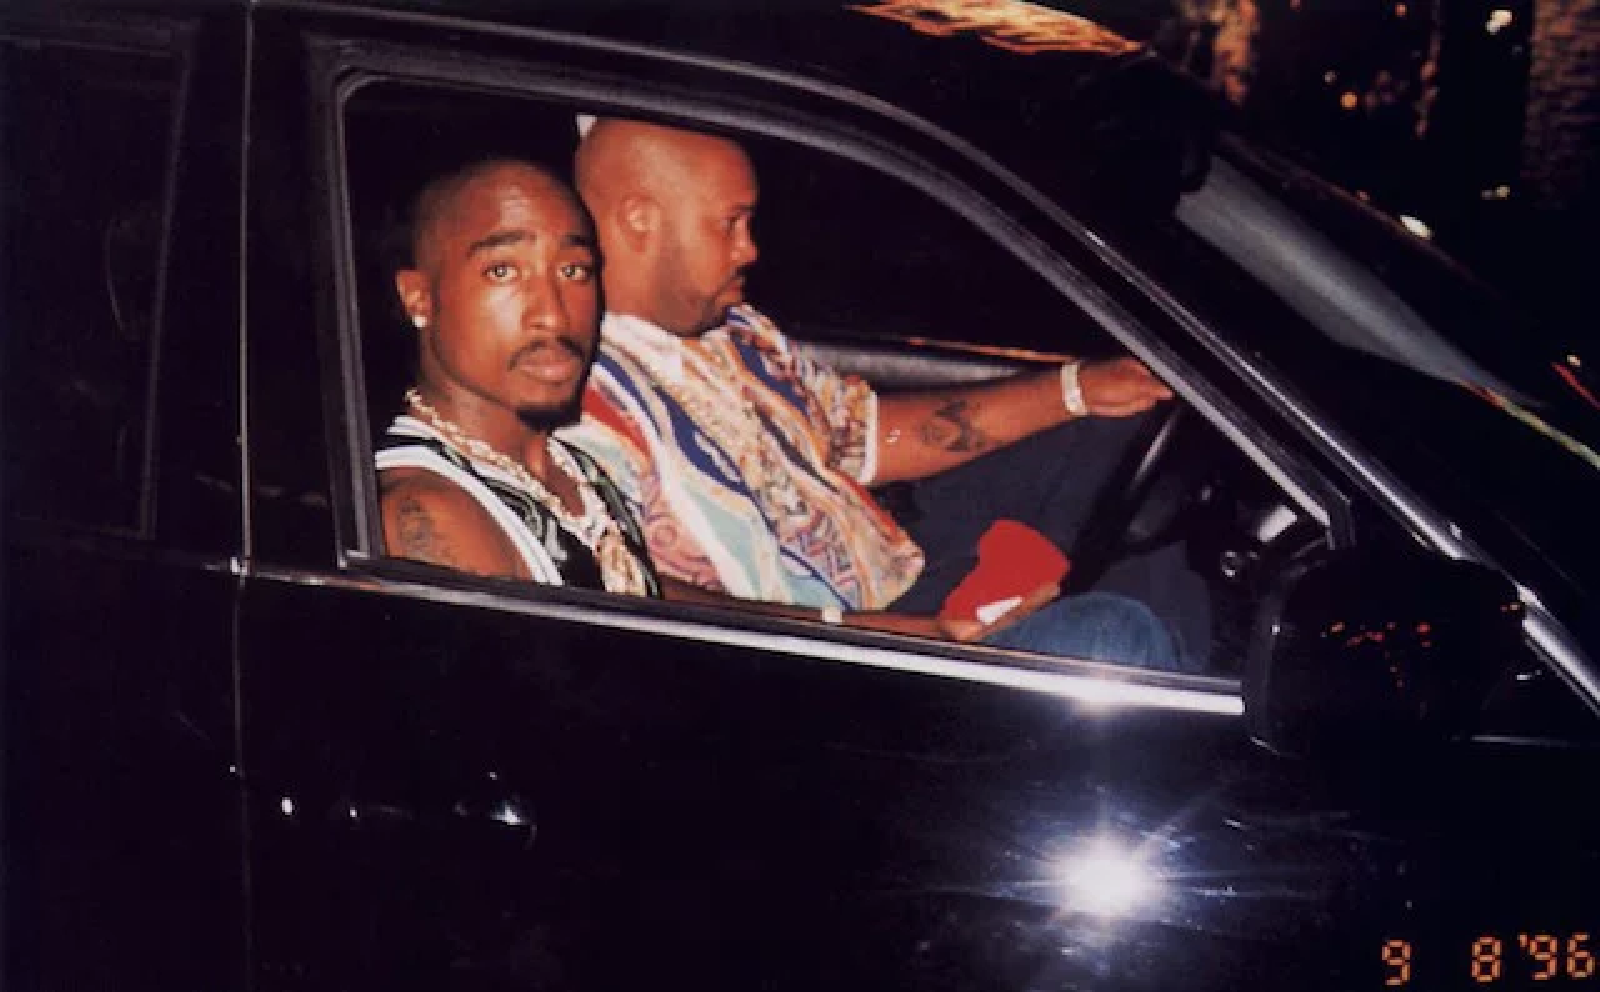 New Evidence In Tupac Shakur Murder Case As Las Vegas Police Conduct Search